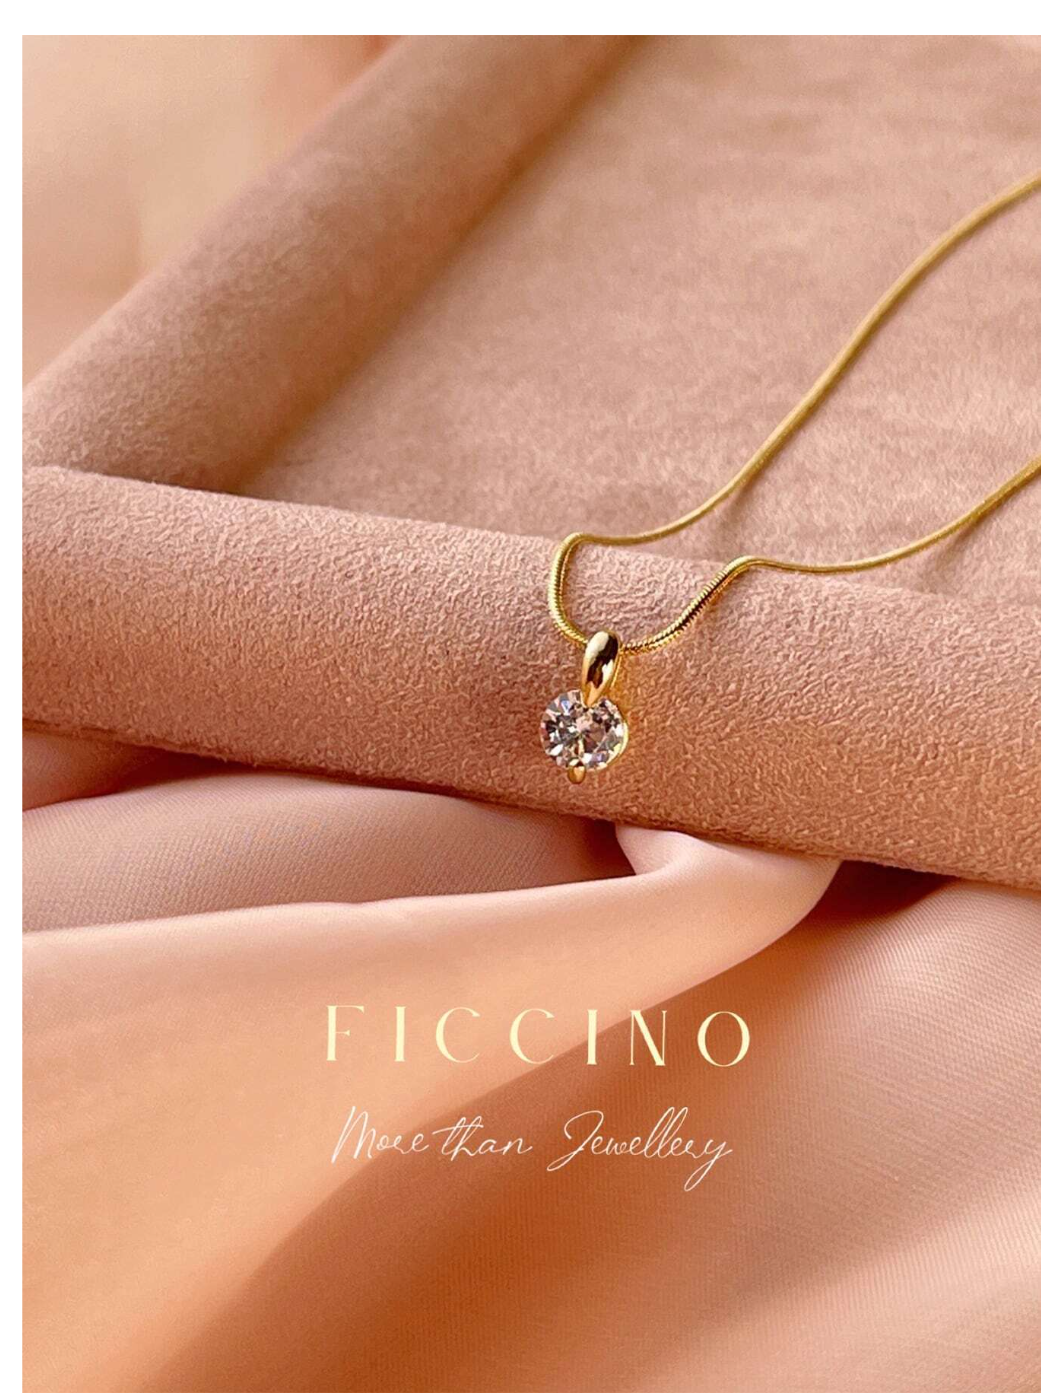 Gleaming Elegance: Classic Gold-Plated Cubic Zirconia Pendant on Titanium Snake Chain – Stylish Everyday Wear and Perfectly Boxed for Festivals and Anniversaries!